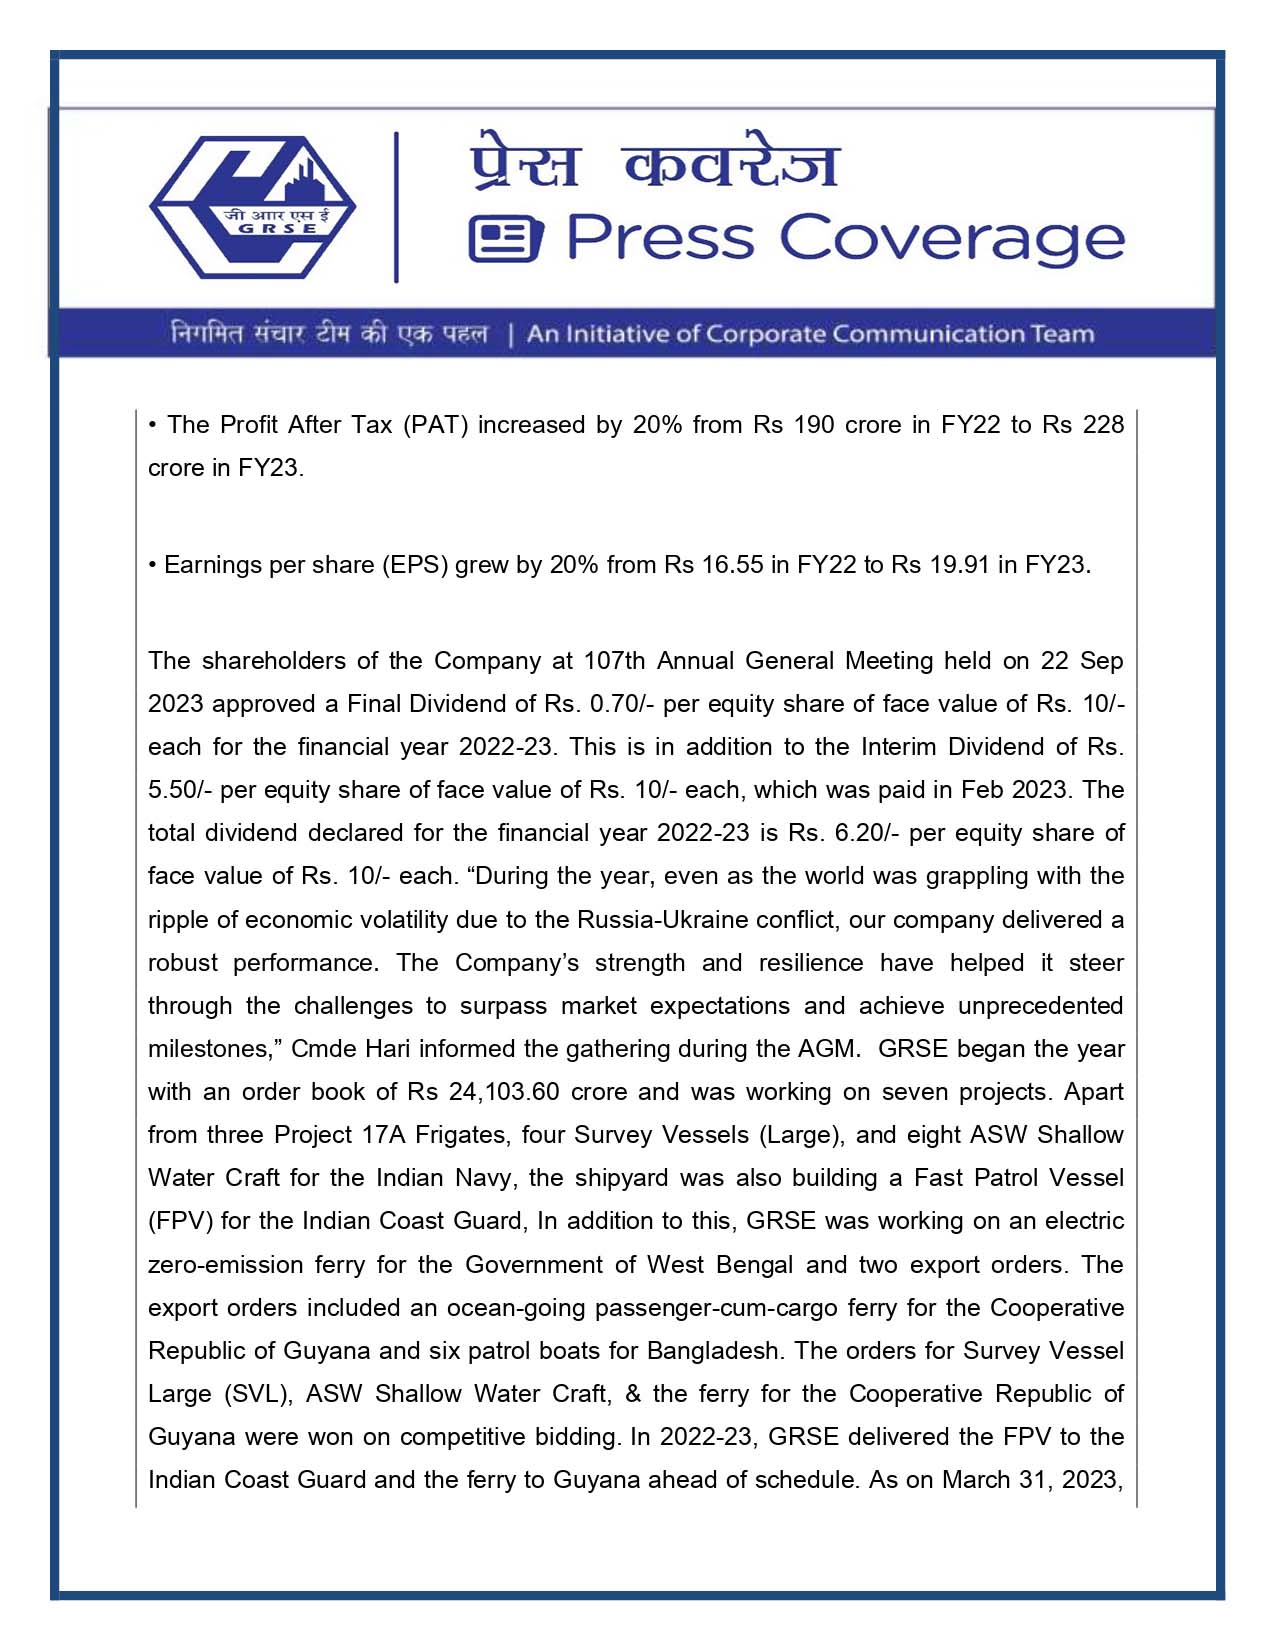 Press Coverage : PSU Connect, 22 Sep 23 : GRSE holds 107th Annual General Meeting, approves dividend of Rs 0.70